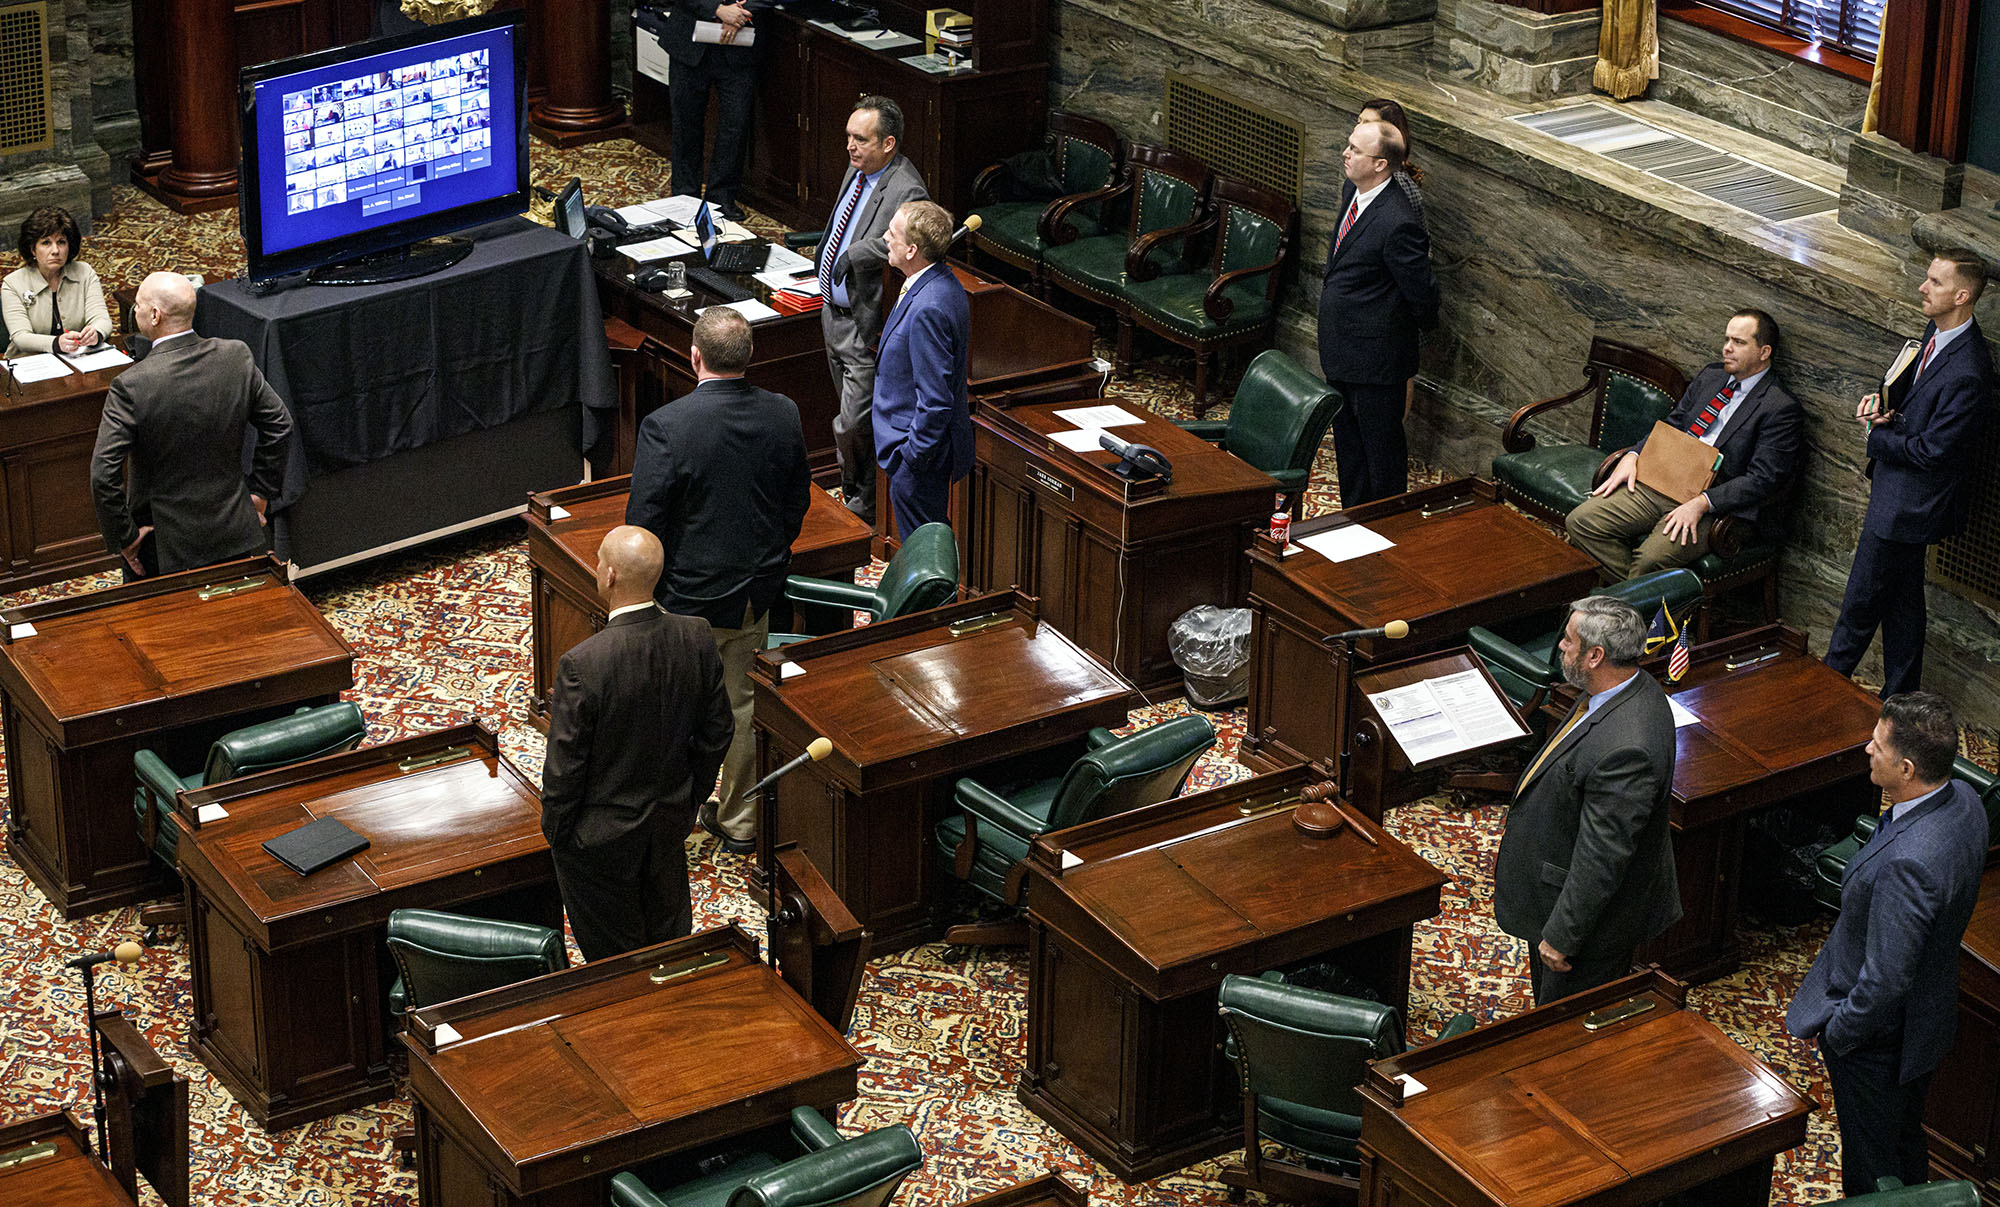 Republican state senators in Pennsylvania observe social distancing as other colleagues live-stream the session on Wednesday, March 25, 2020. The lawmakers vote on changing the primary election date, among other measures, in the first Senate session in state history where members can meet online and vote remotely due to the coronavirus pandemic.